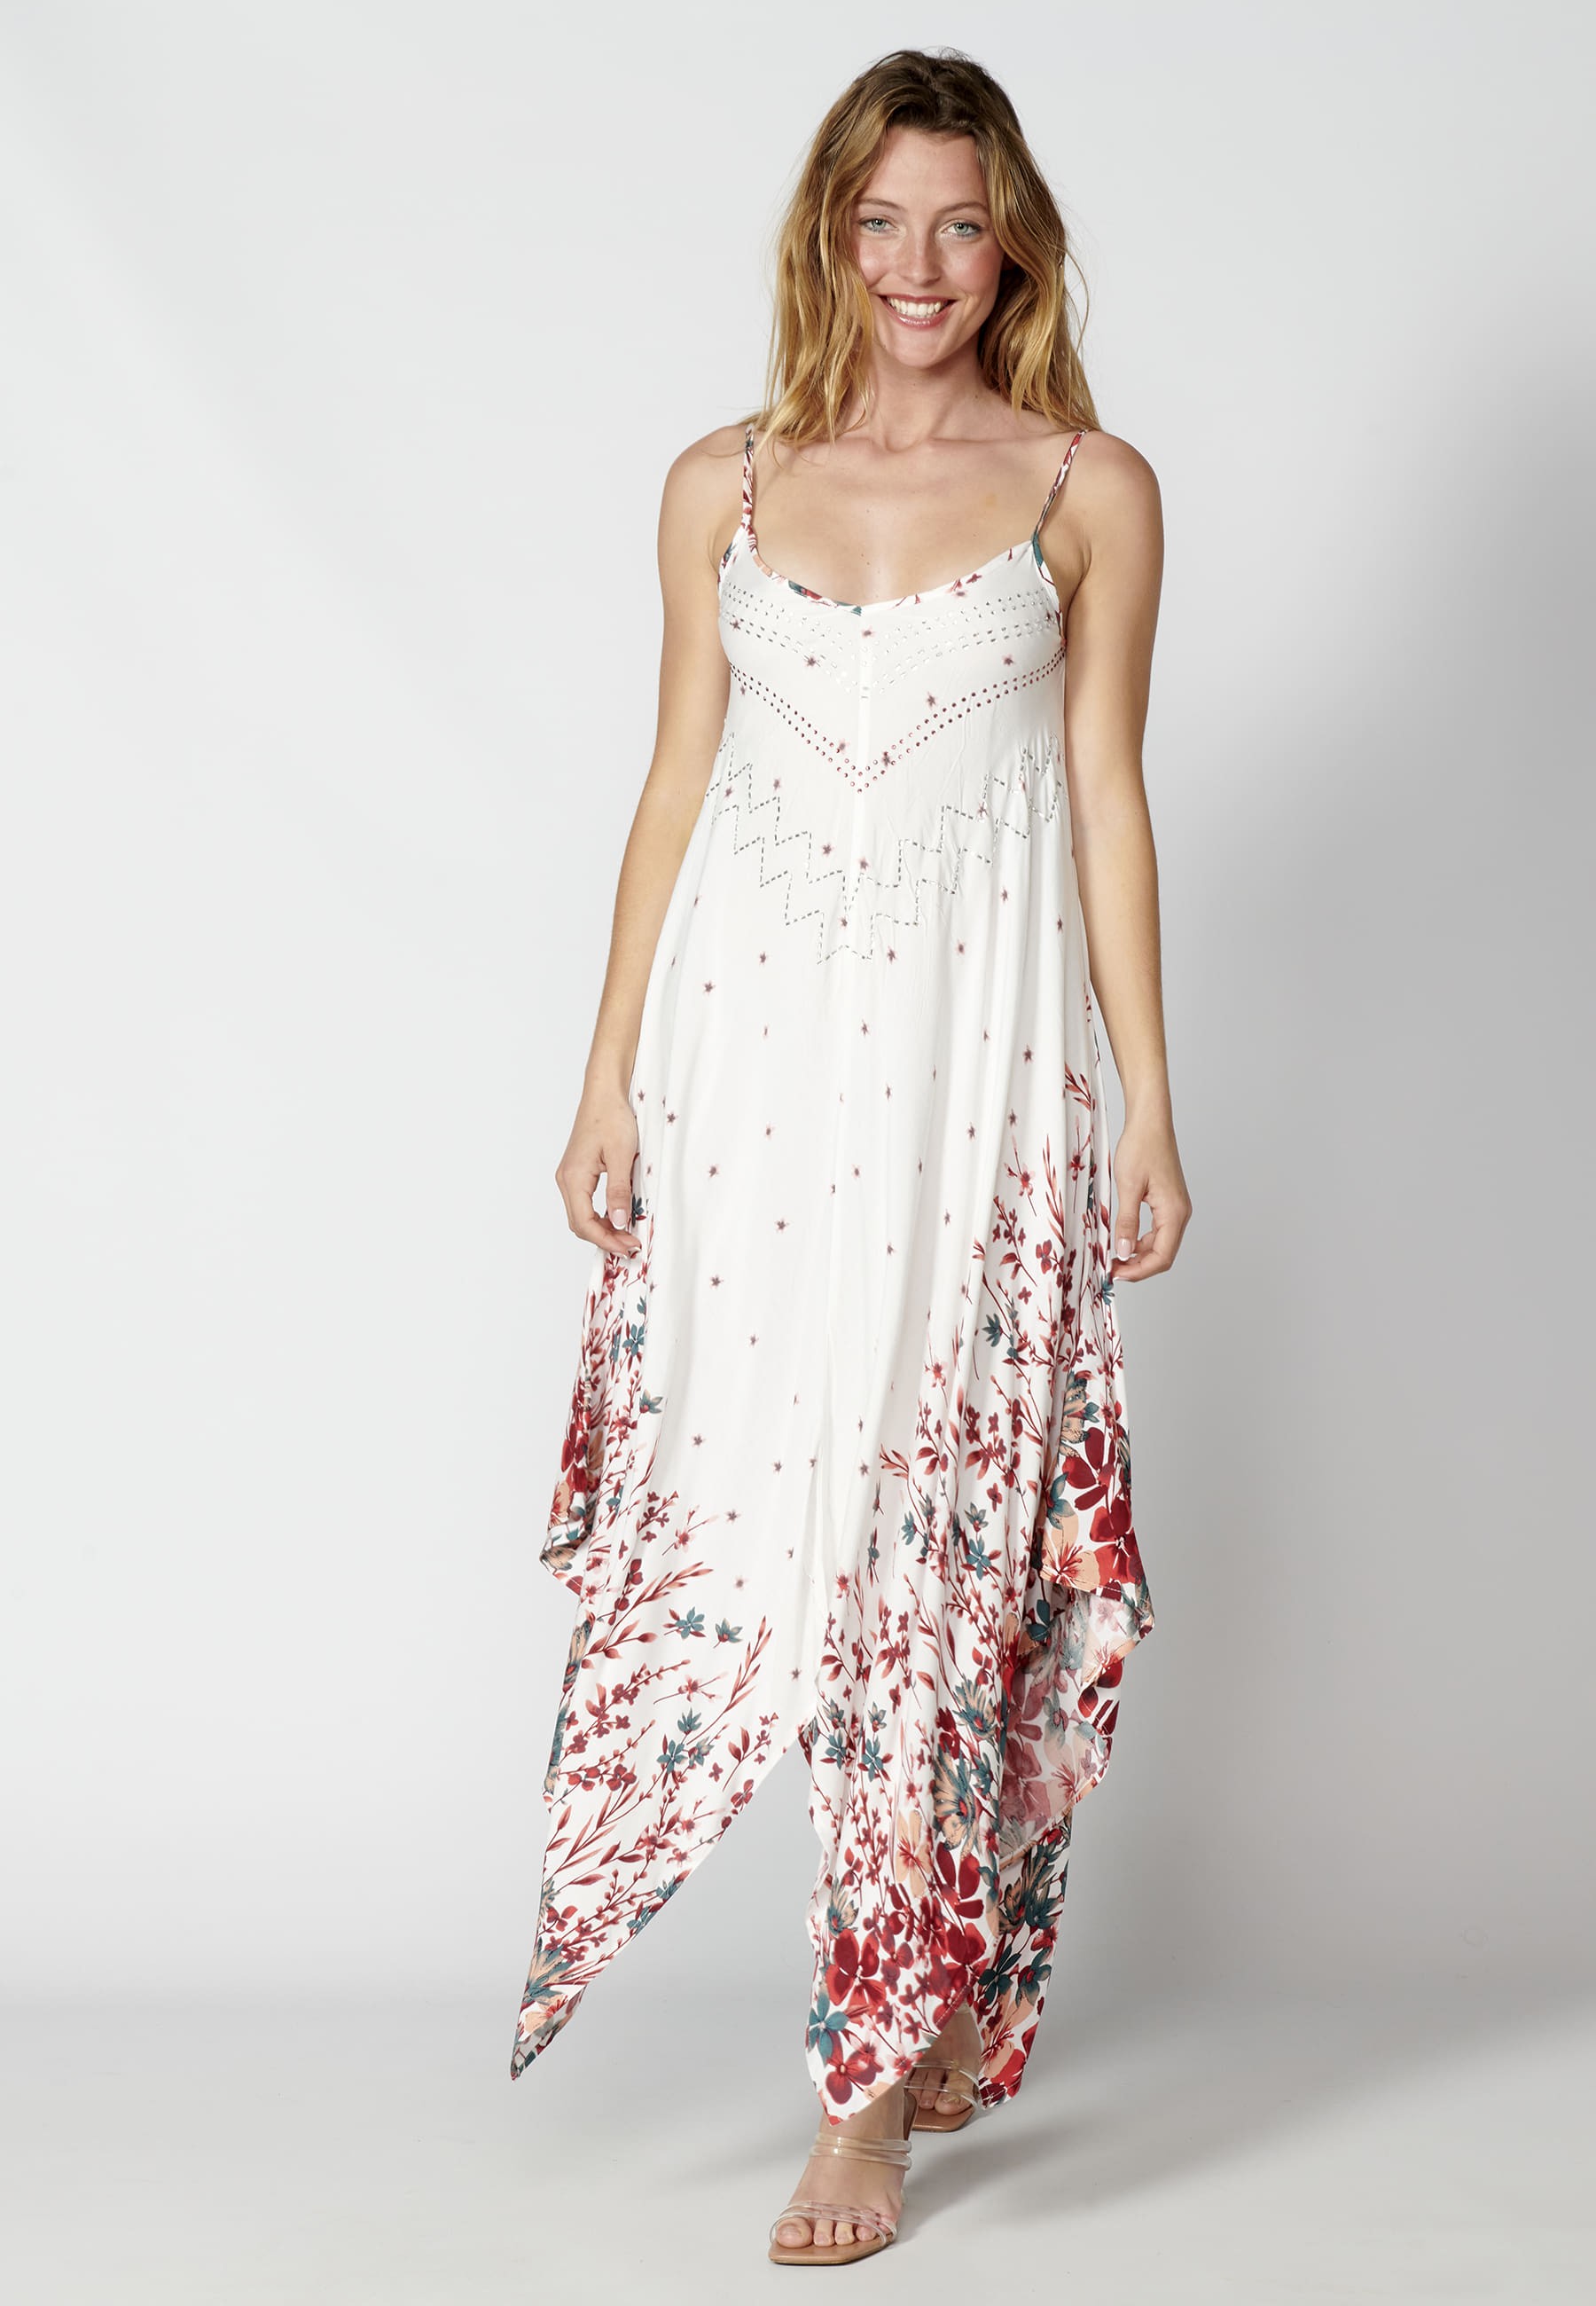 Loose long strappy dress with white floral print for Women